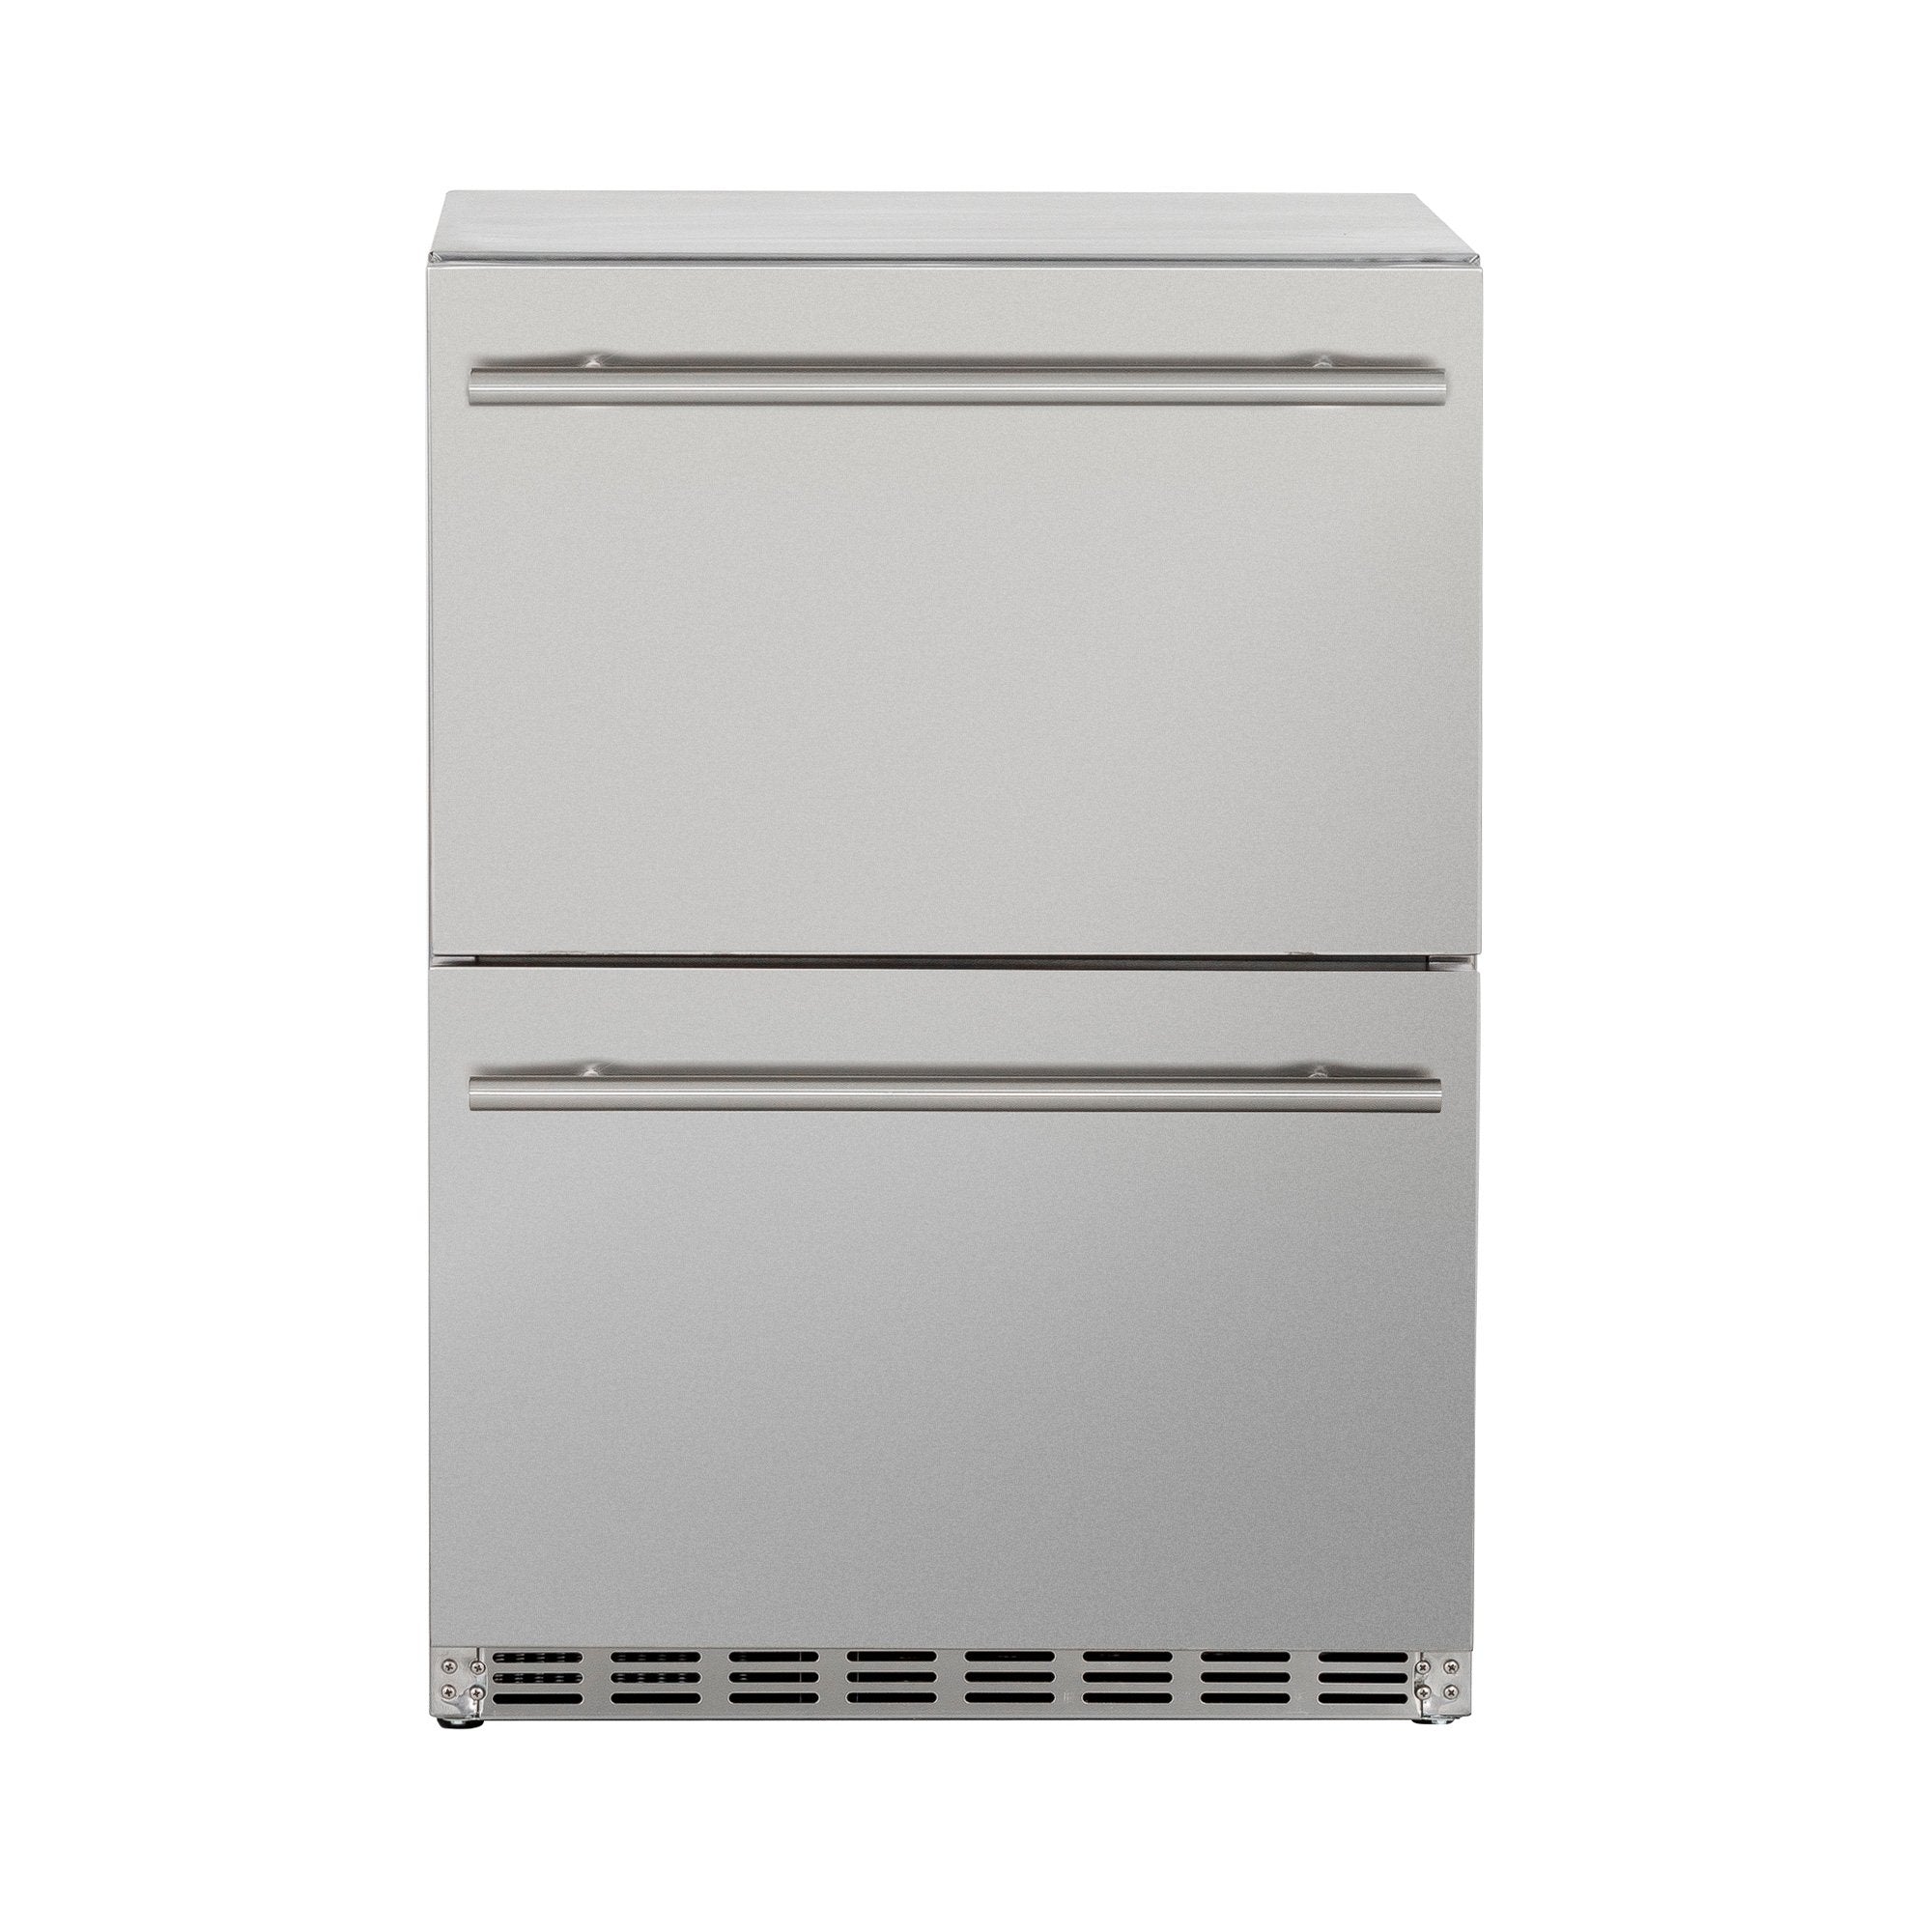 Summerset 24 Inch 5.3c Deluxe Outdoor Rated 2-Drawer Refrigerator SSRFR-24DR2